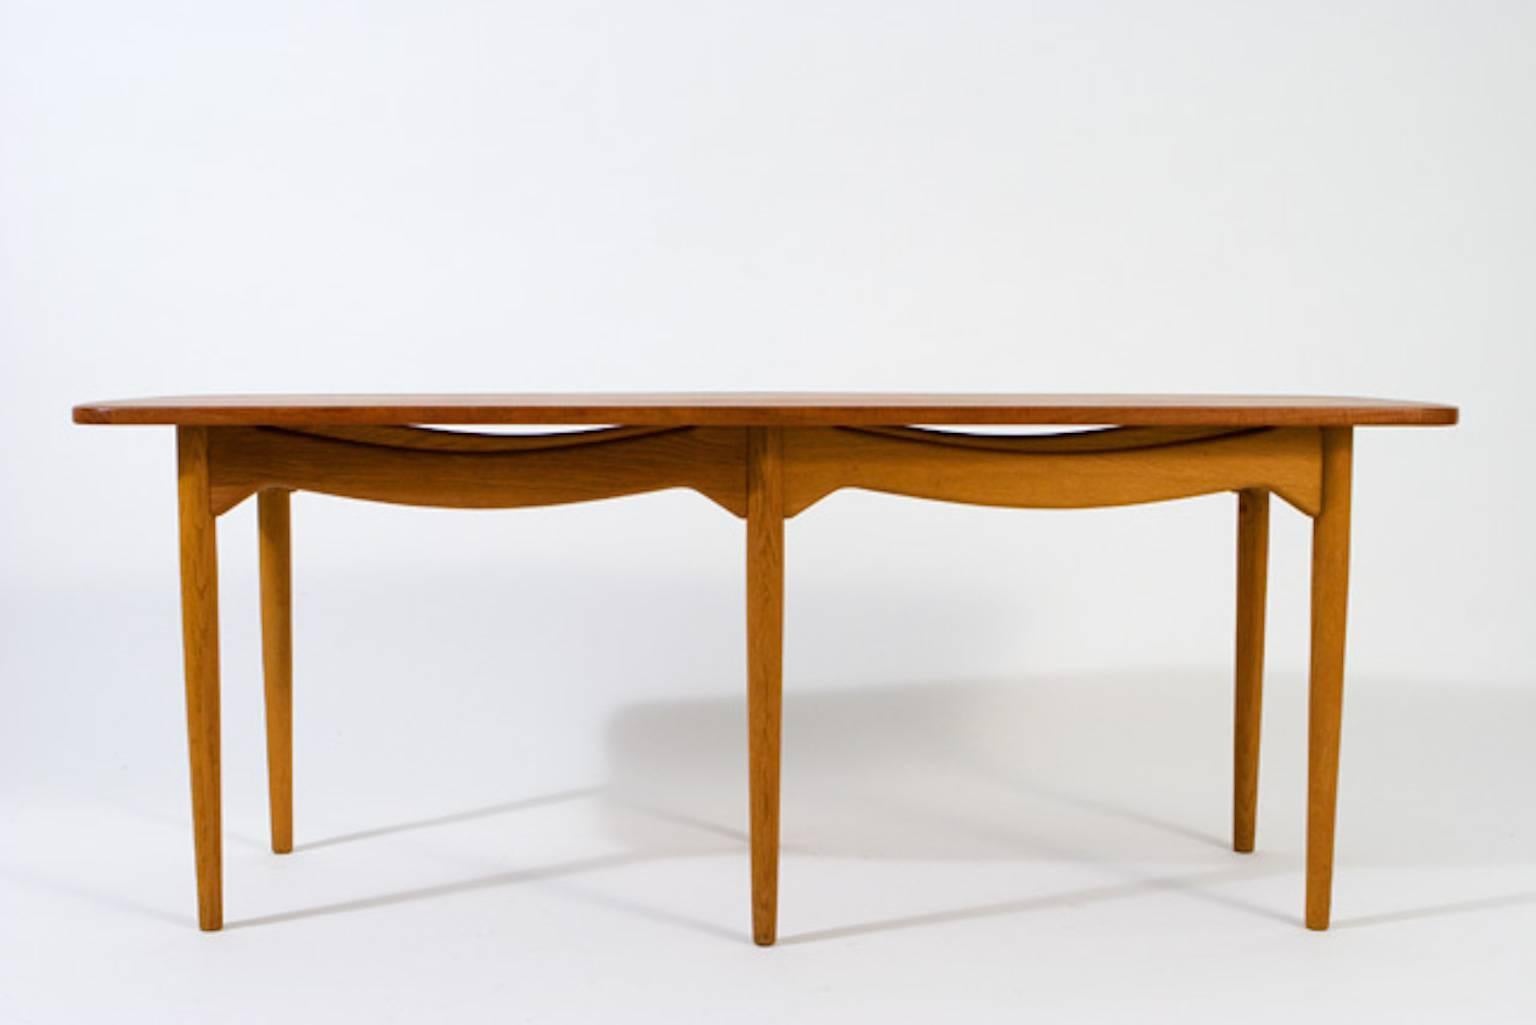 Vintage Danish coffee/cocktail table. Six legs, with teak top and oak base. Undulating stretcher.

Professional, skilled furniture restoration is an integral part of what we do every day. Our goal is to provide beautiful, functional furniture that